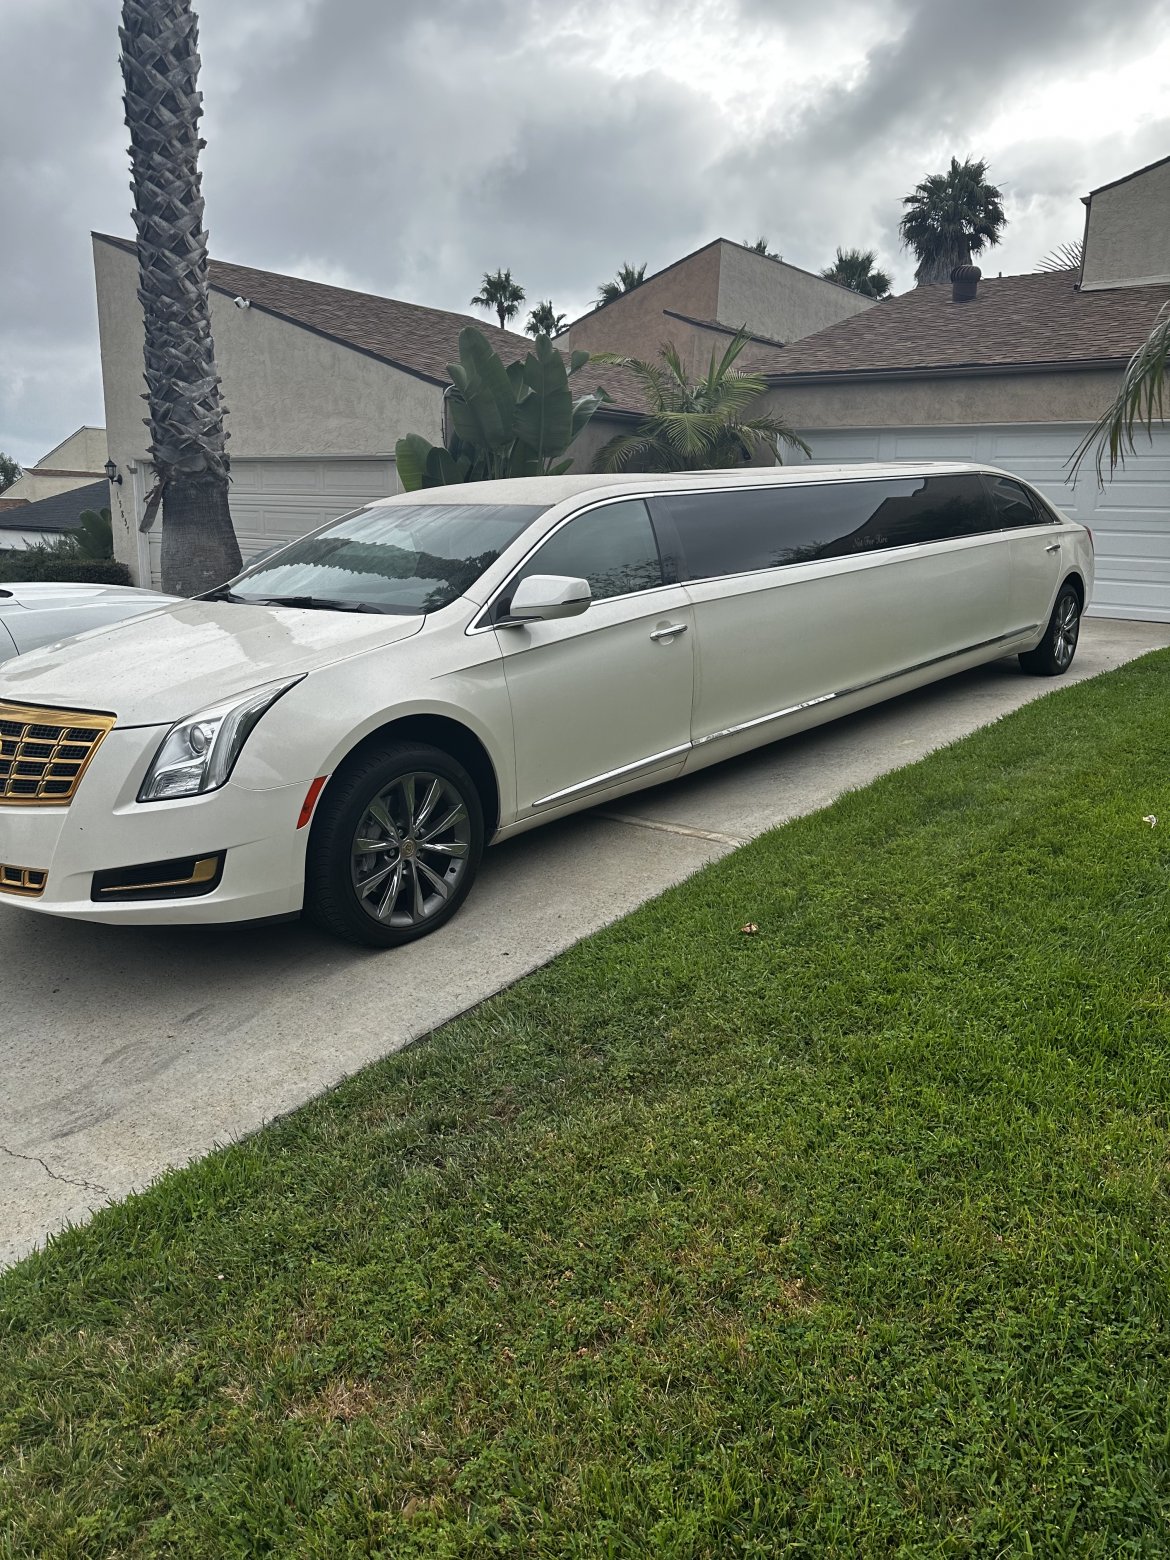 Limousine for sale: 2014 Cadillac XTS 140&quot; by Limos by Moonlight